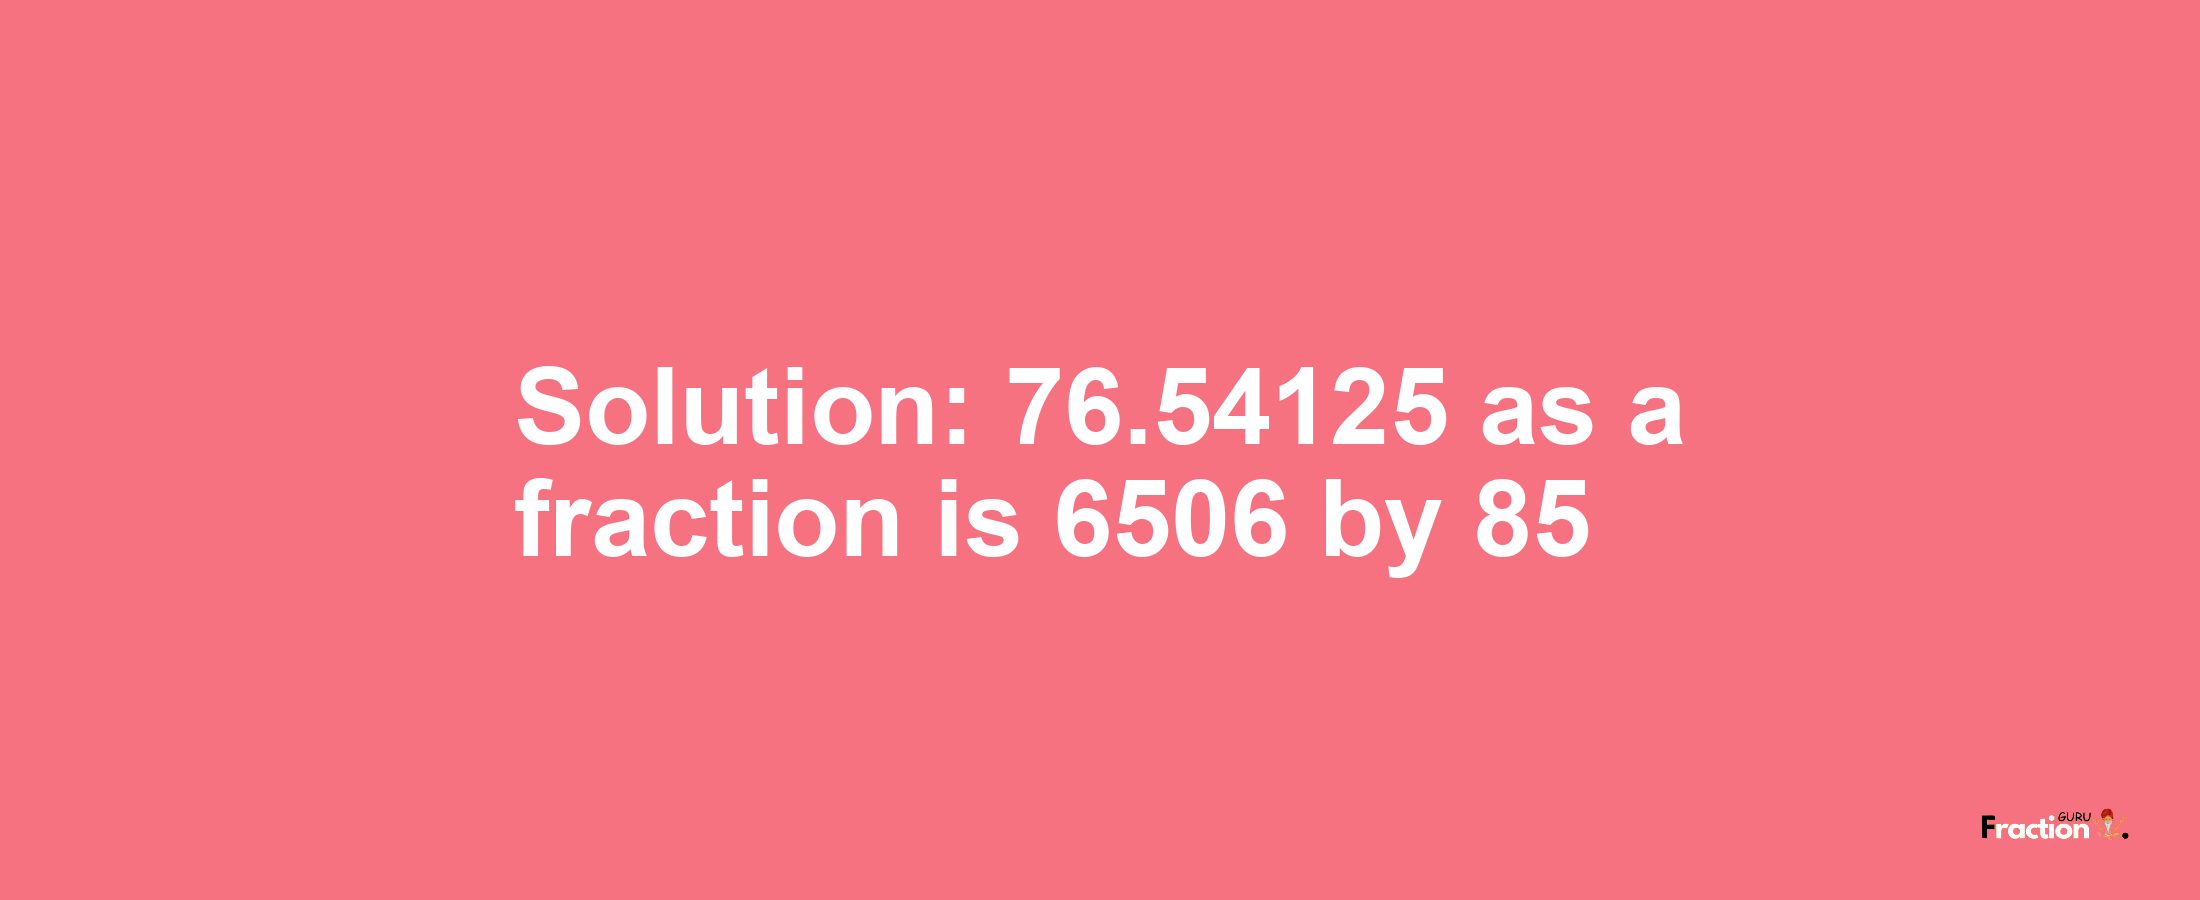 Solution:76.54125 as a fraction is 6506/85